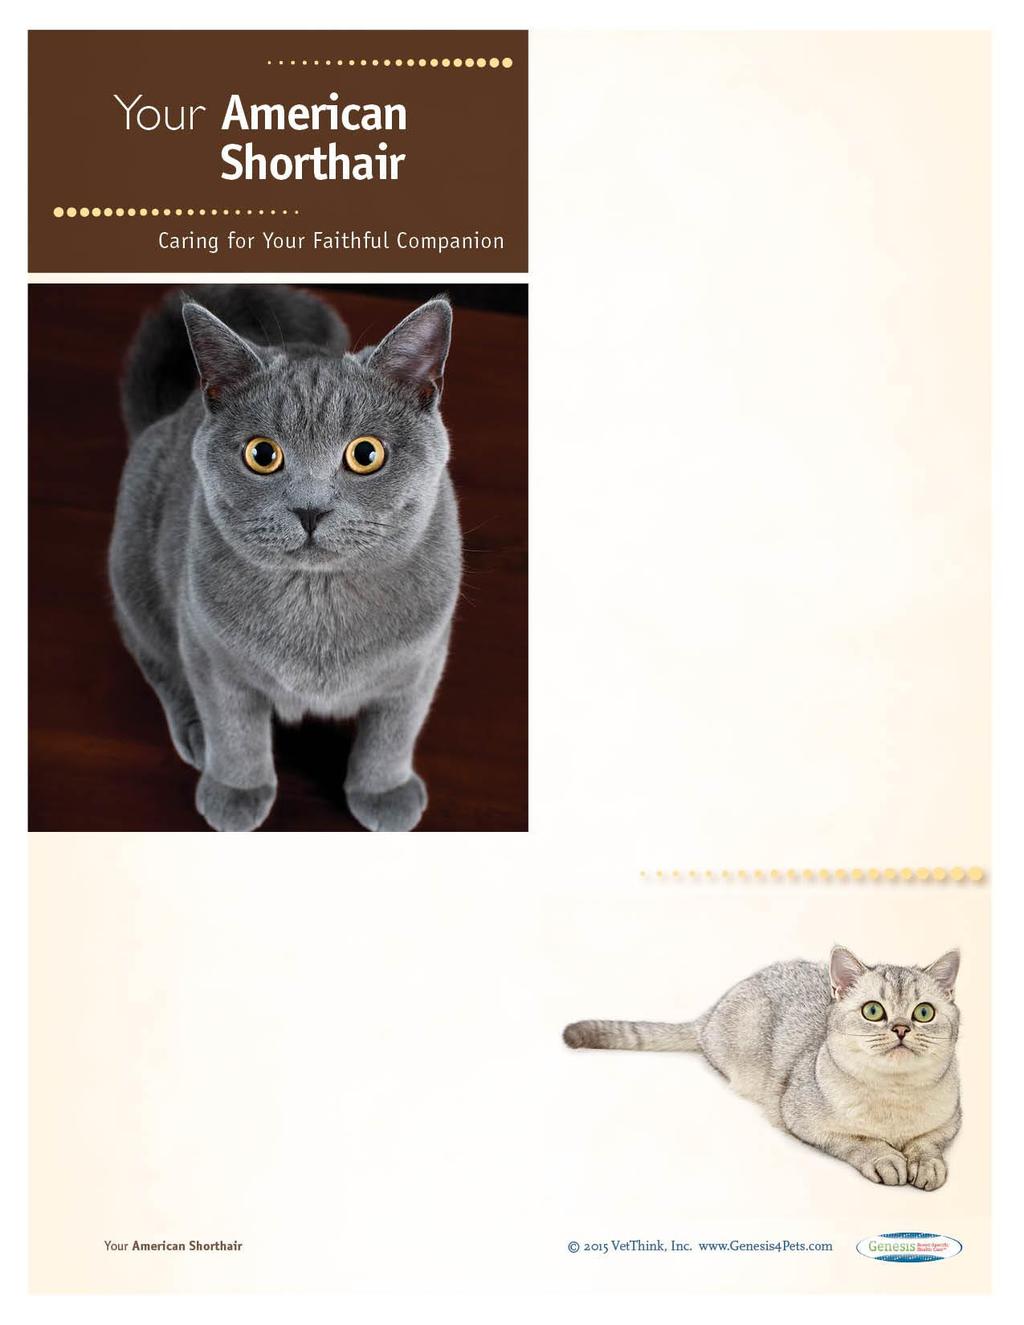 American Shorthairs: What a Unique Breed! Your cat is special! She senses your moods, is curious about your day, and has purred her way into your heart.